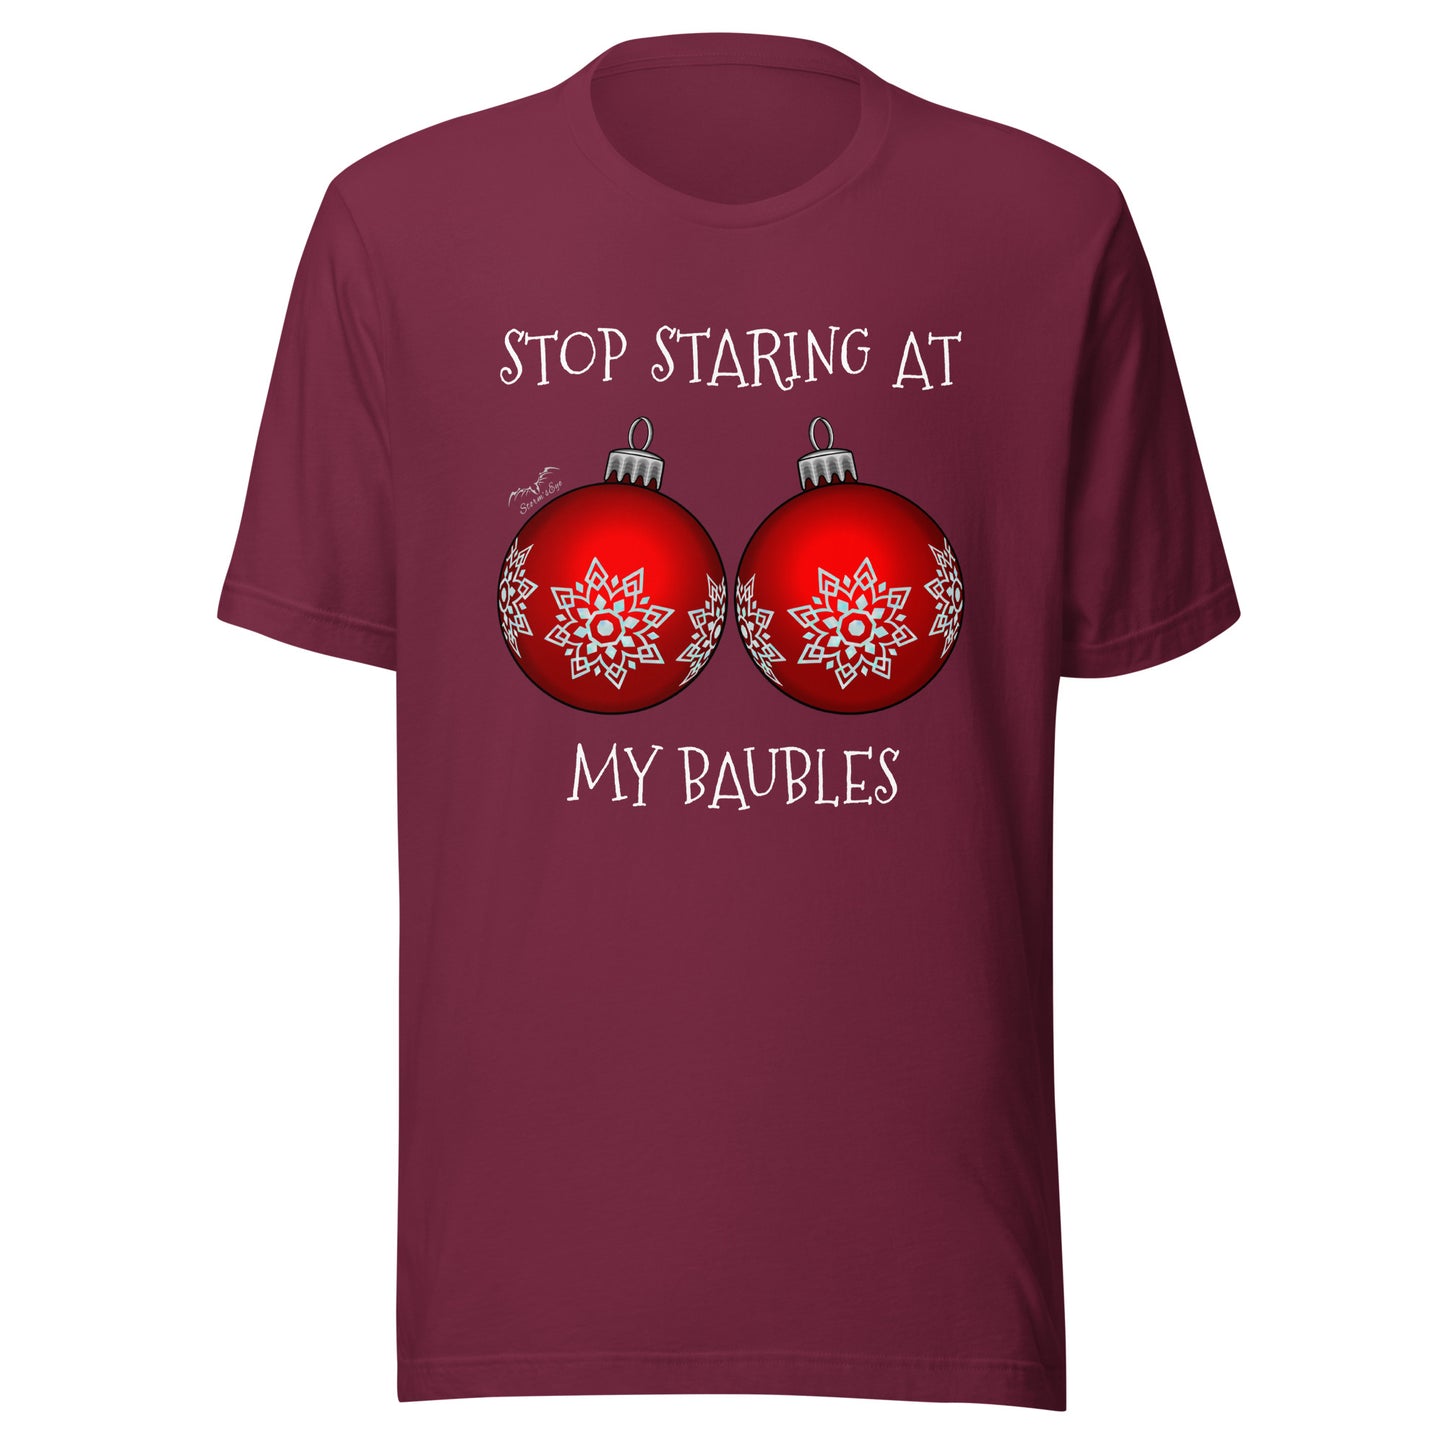 stormseye design stop staring baubles christmas T shirt, flat view maroon red